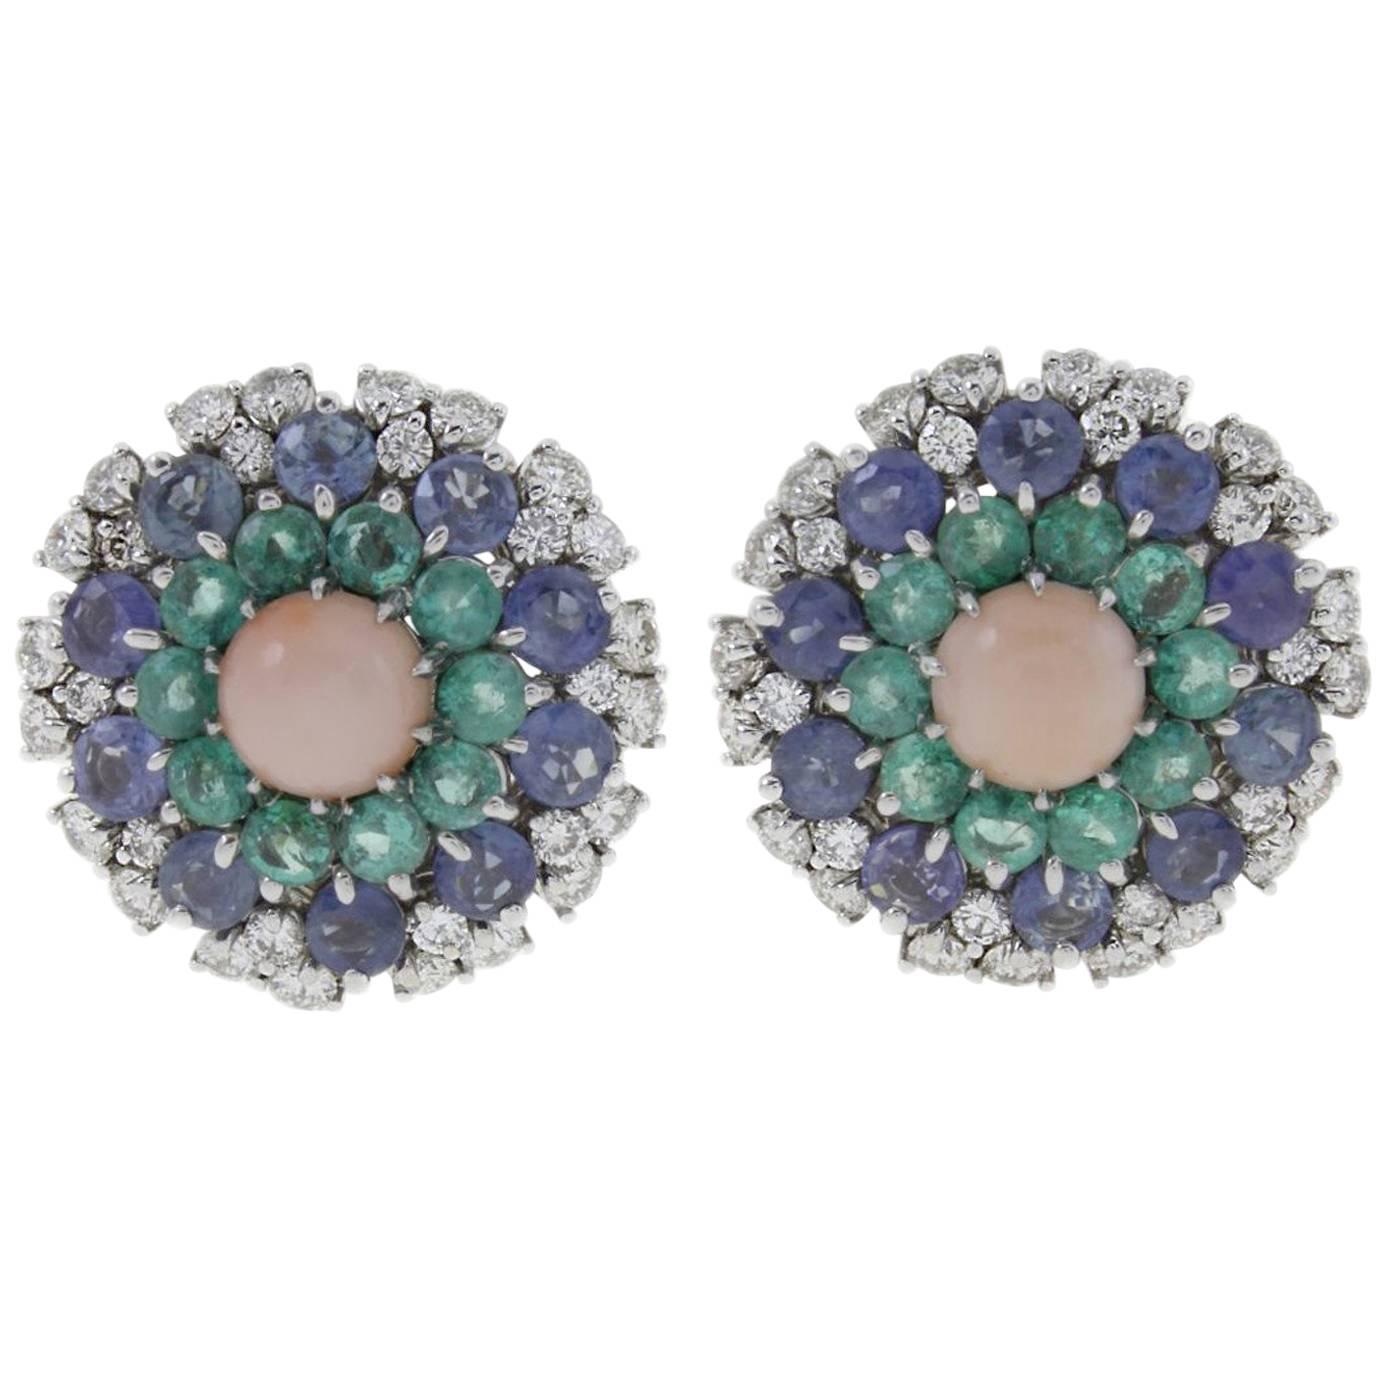 White Diamonds, Blue Sapphires, Emeralds, Pink Coral White Gold Stud Earrings For Sale